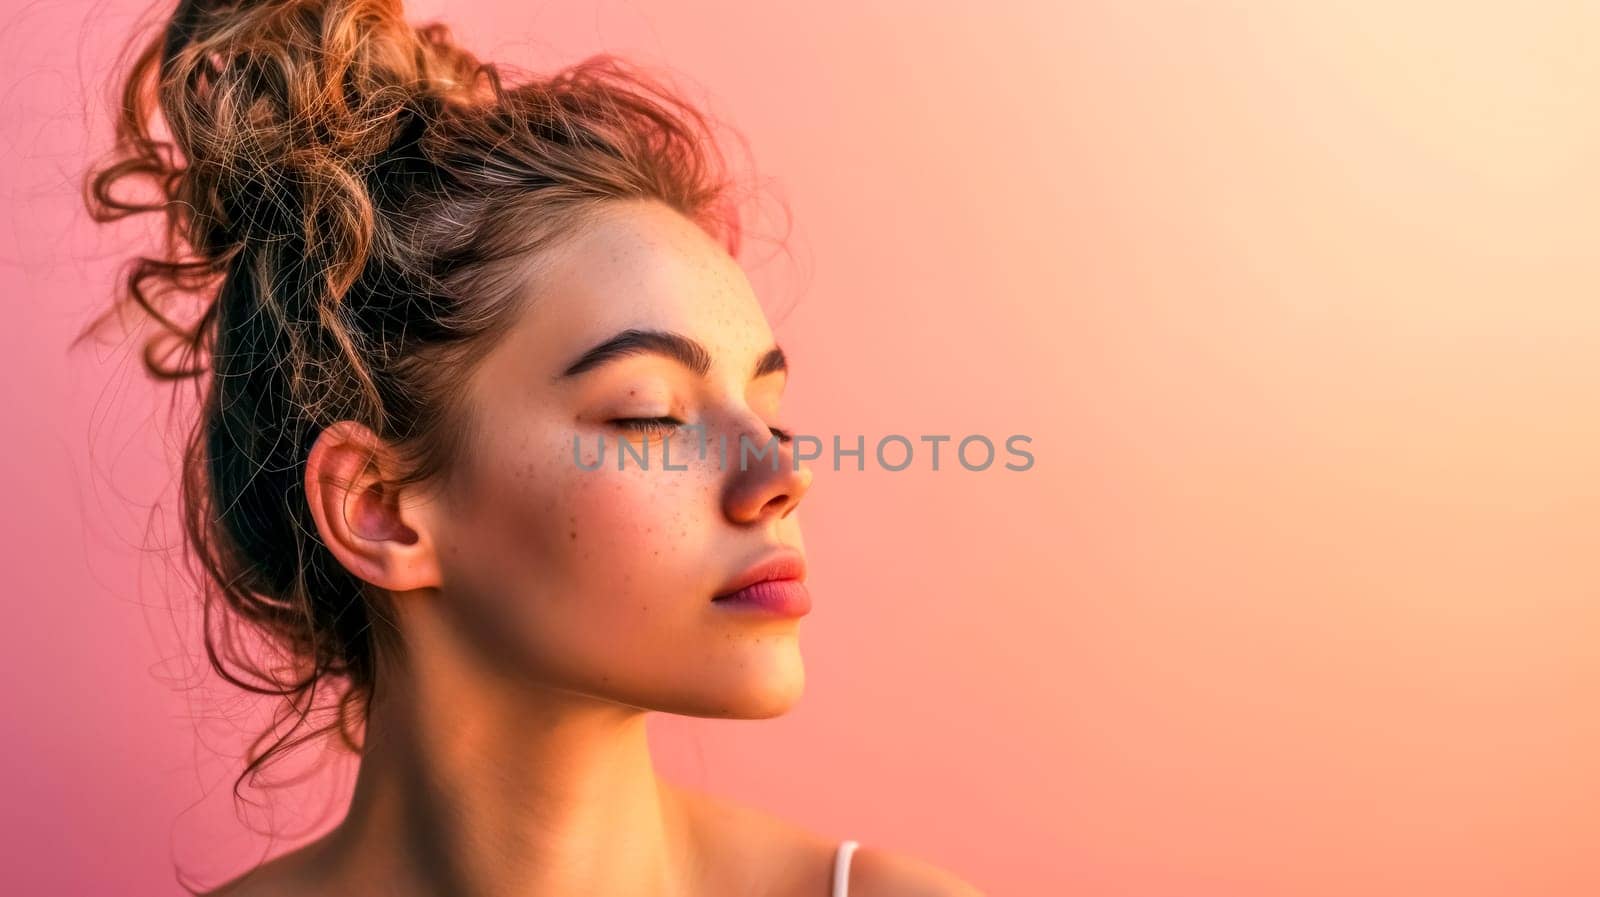 Young woman with freckles enjoys the gentle warmth of sunset light